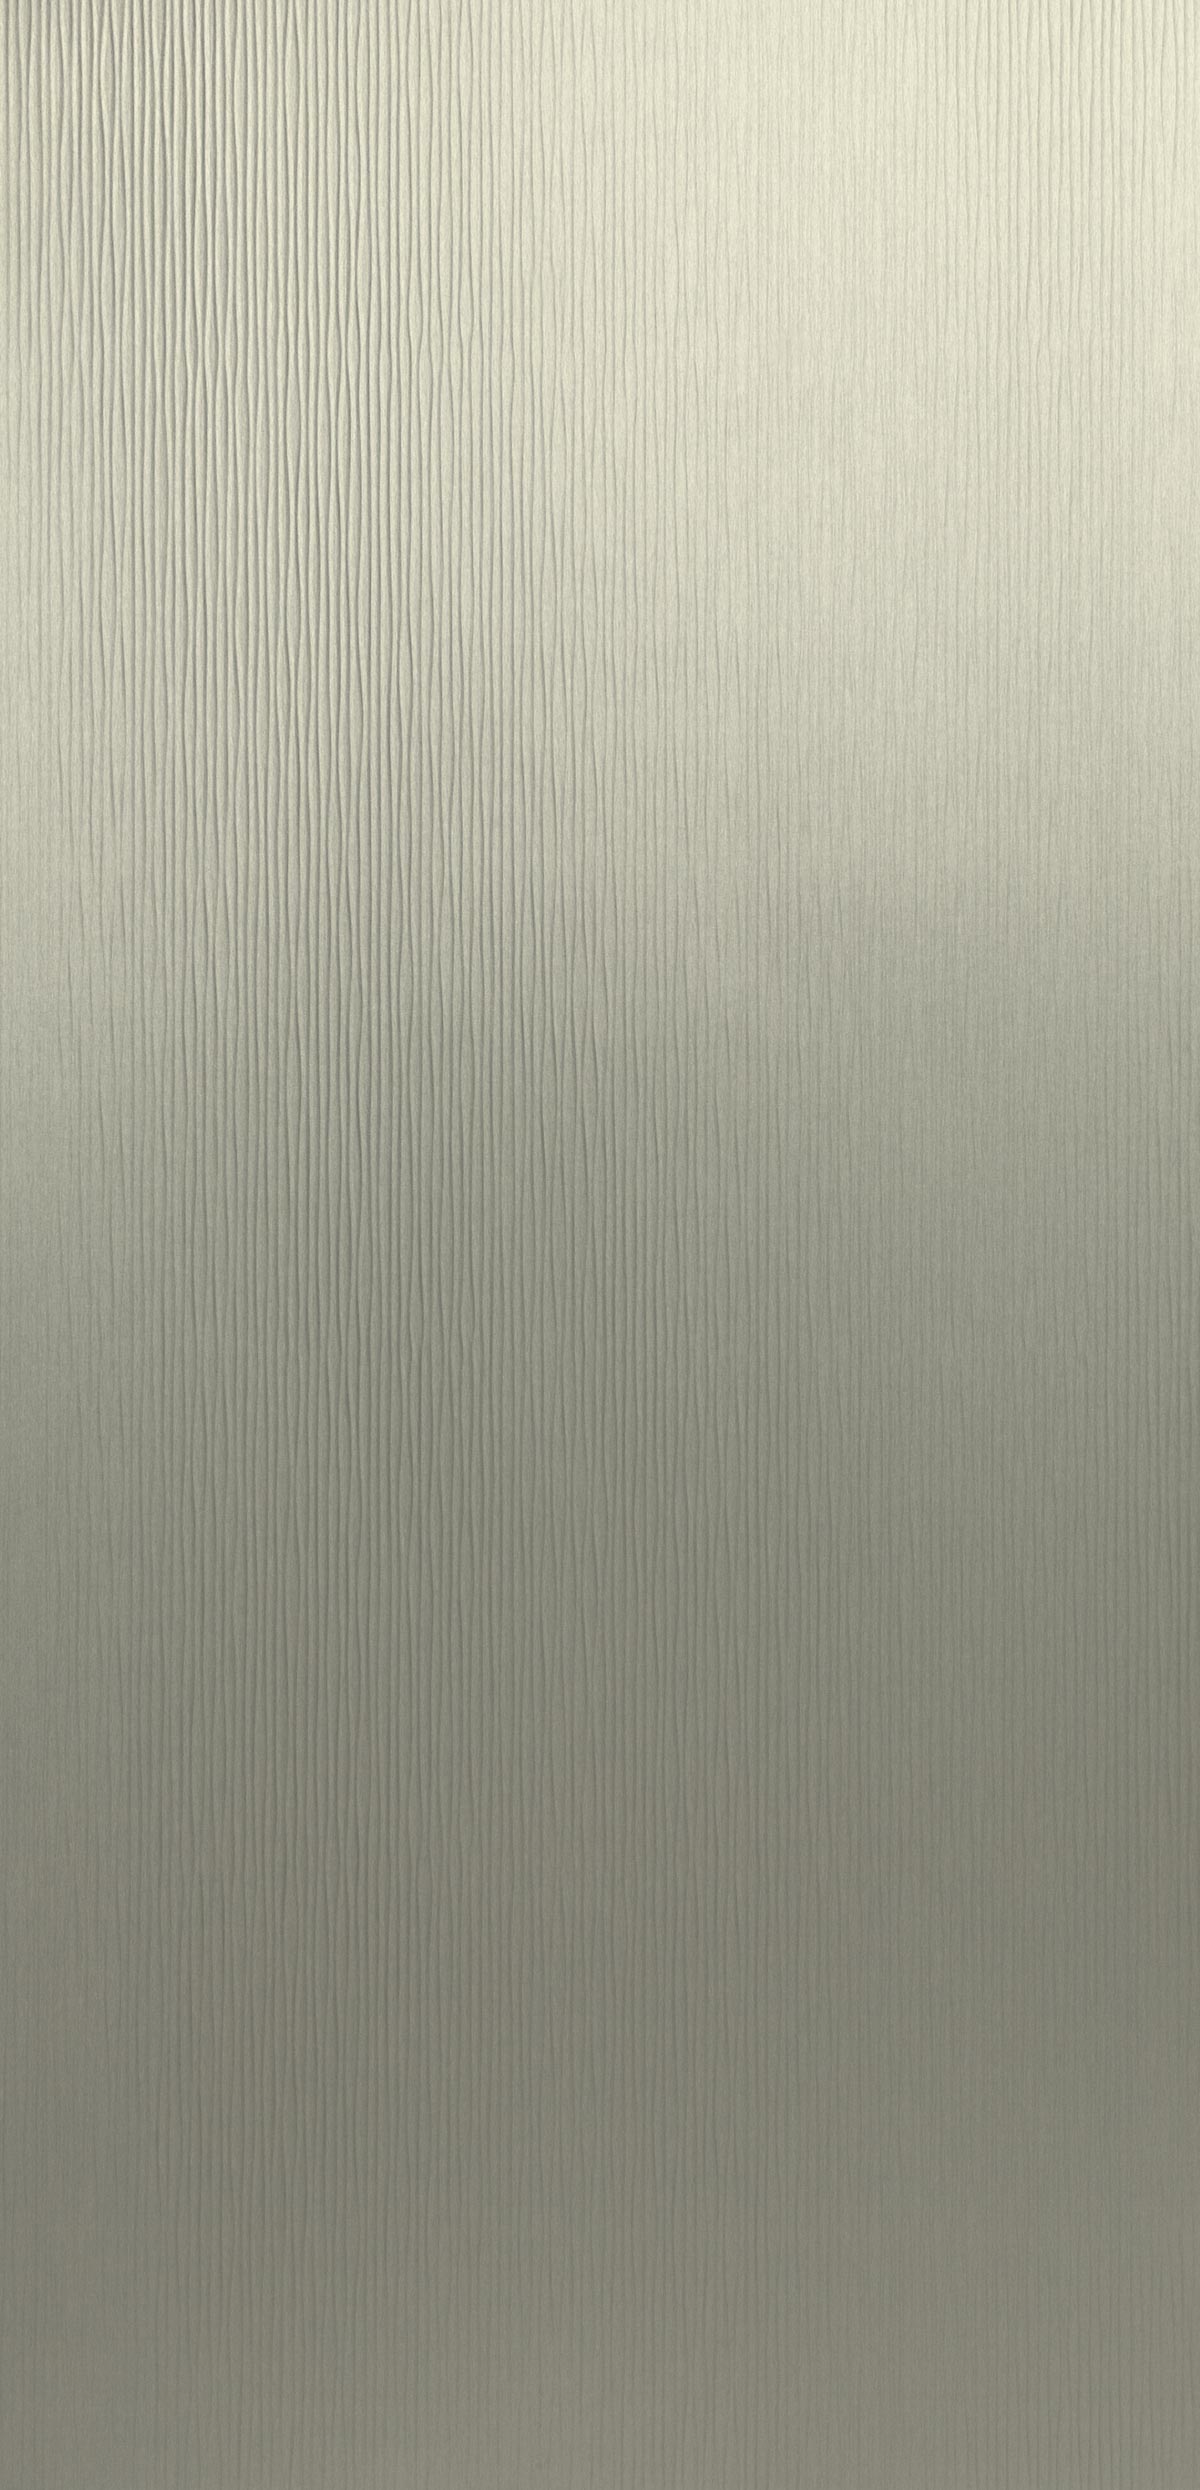 Cannelé Champagne brushed 4051-panel